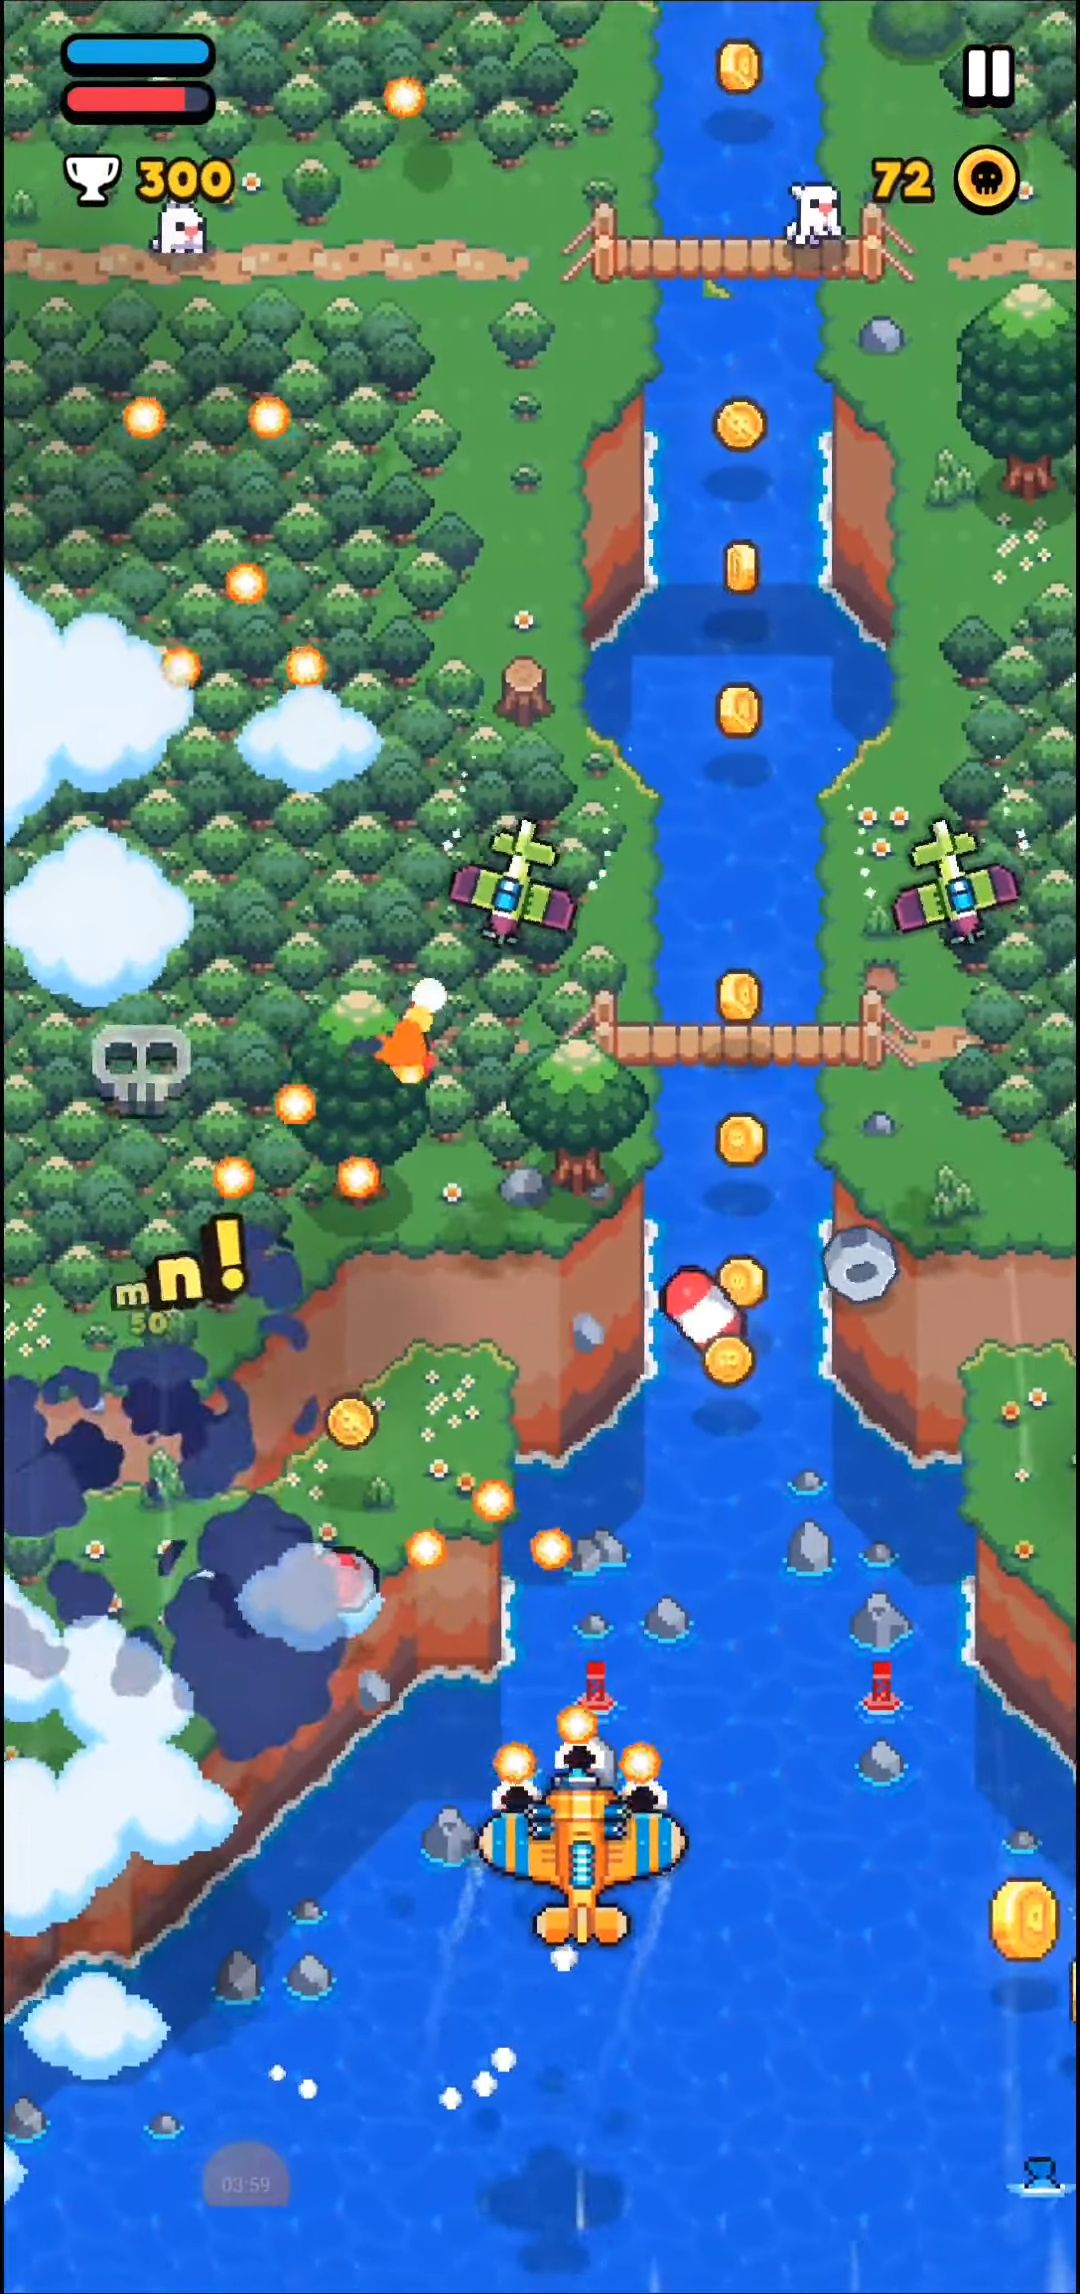 Gameplay of the Skies of Chaos for Android phone or tablet.